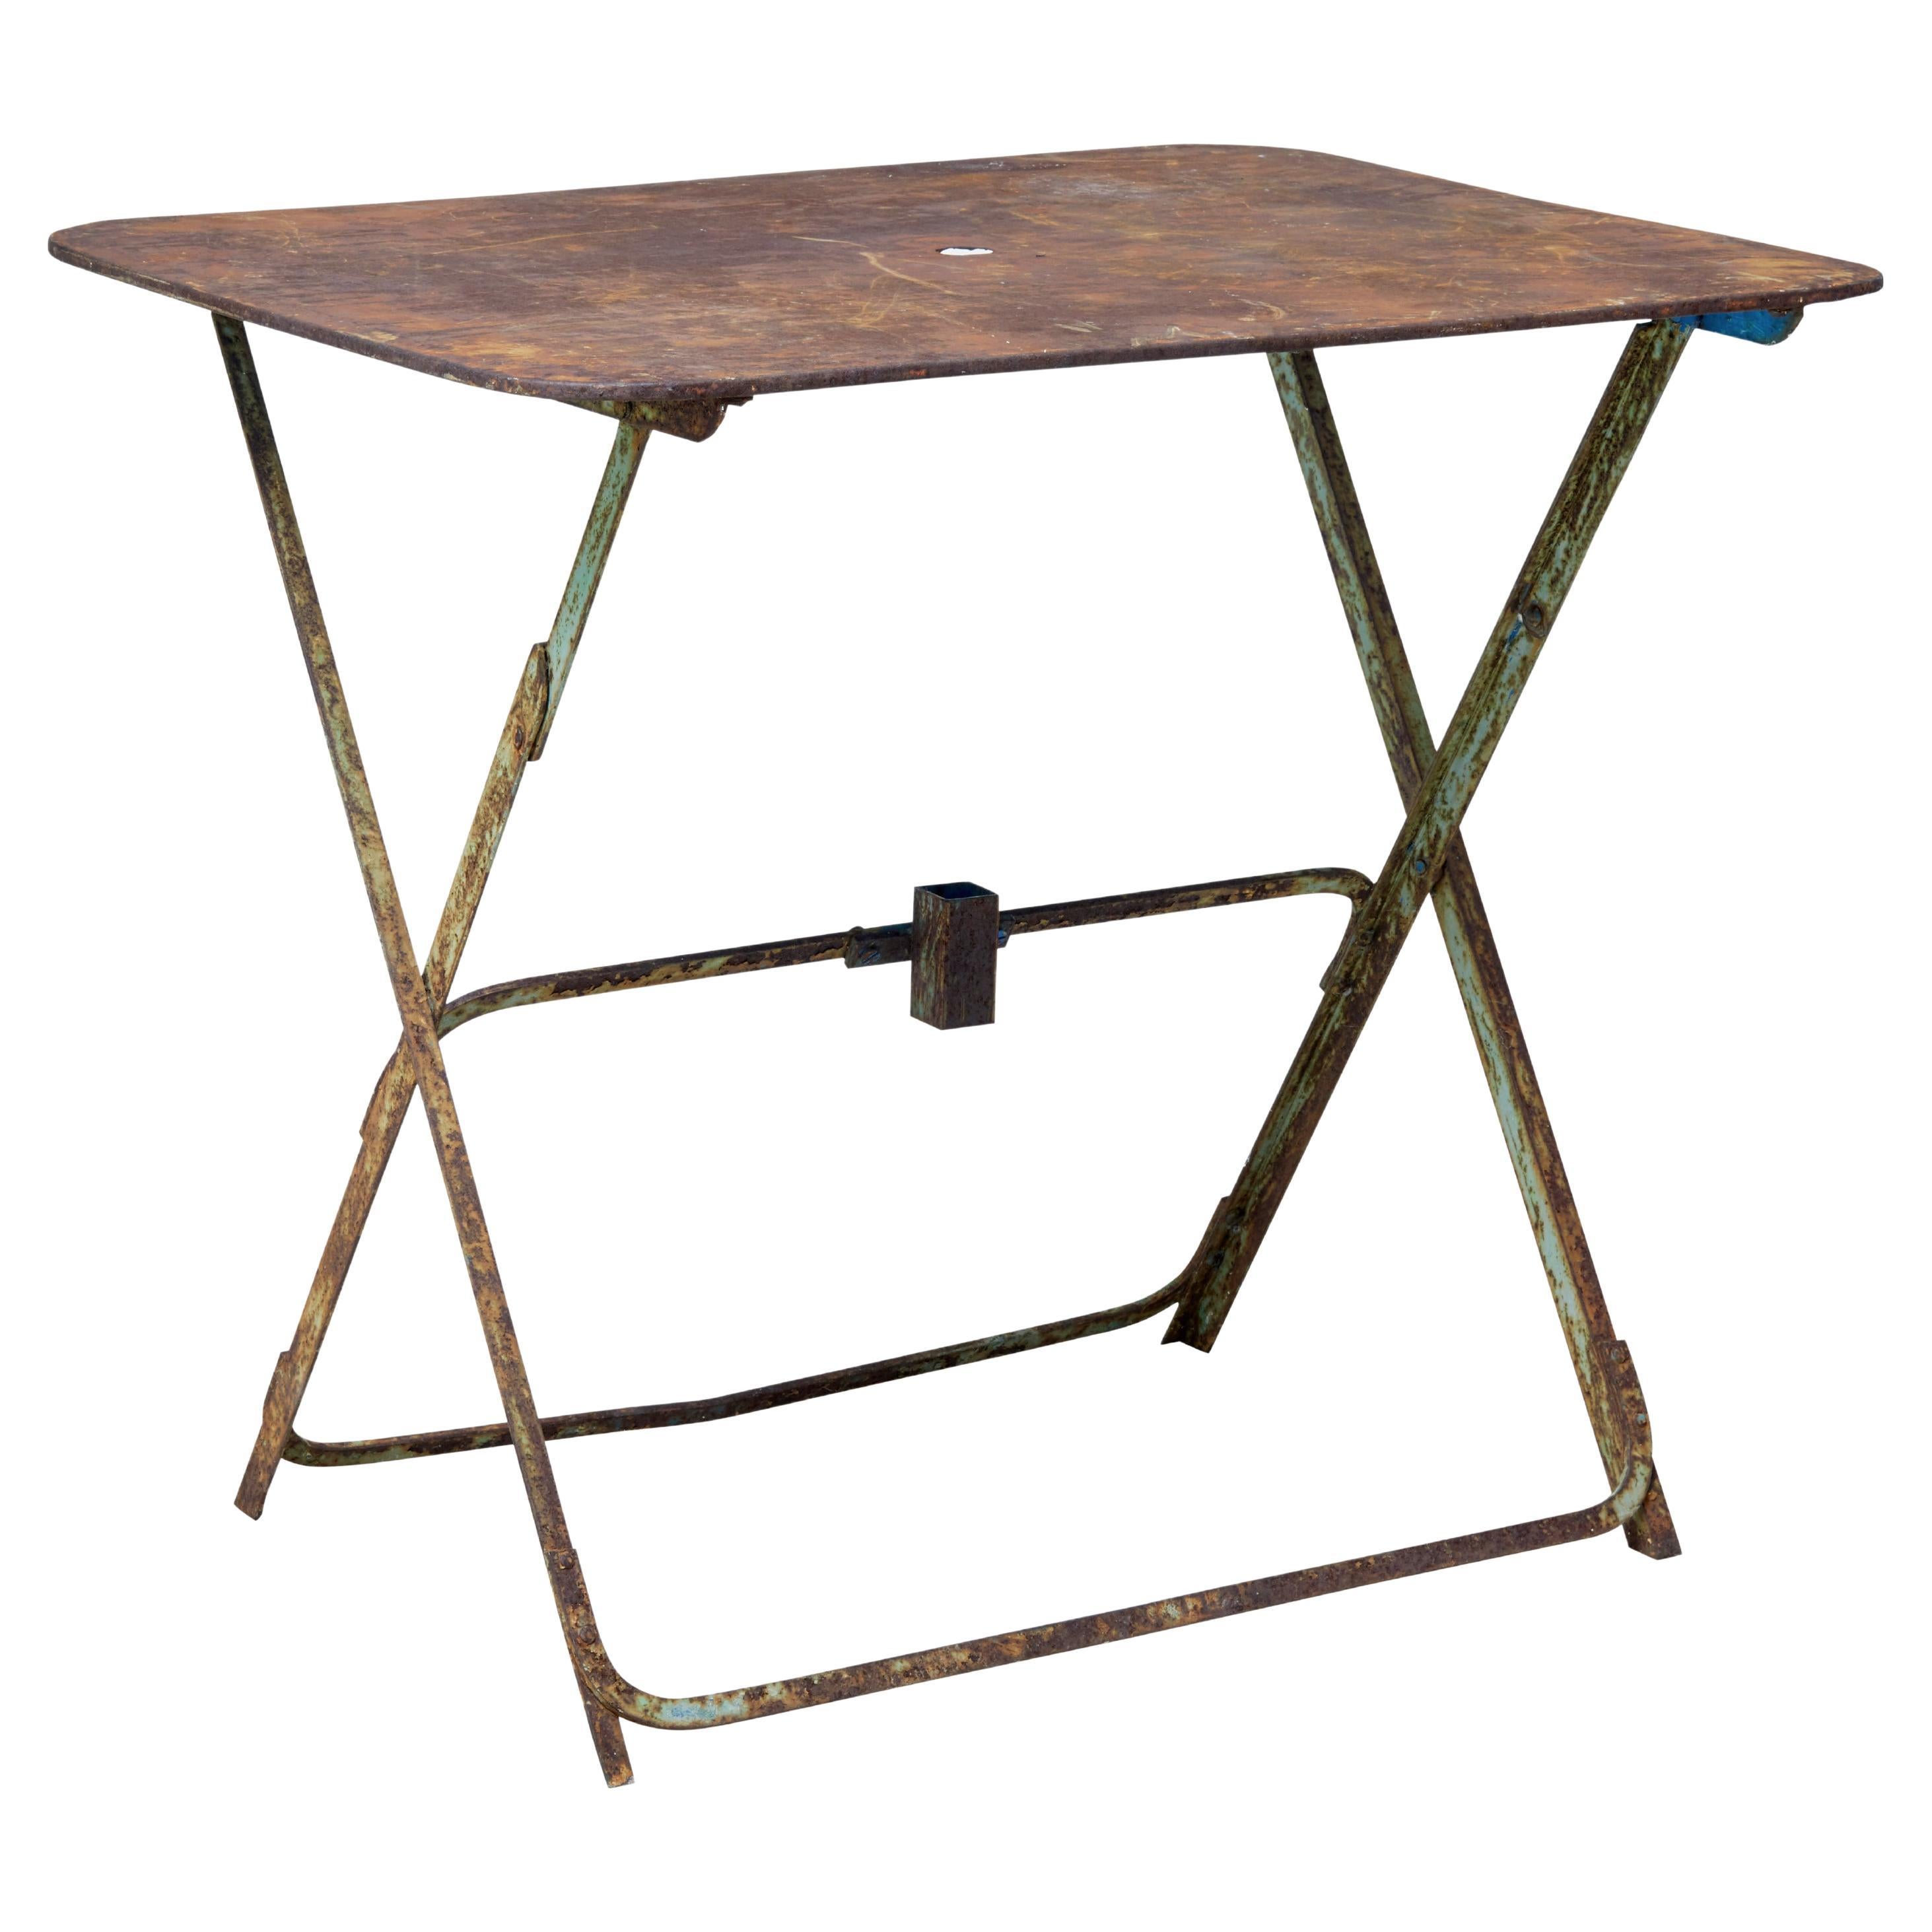 Early 20th century French folding metal garden table For Sale